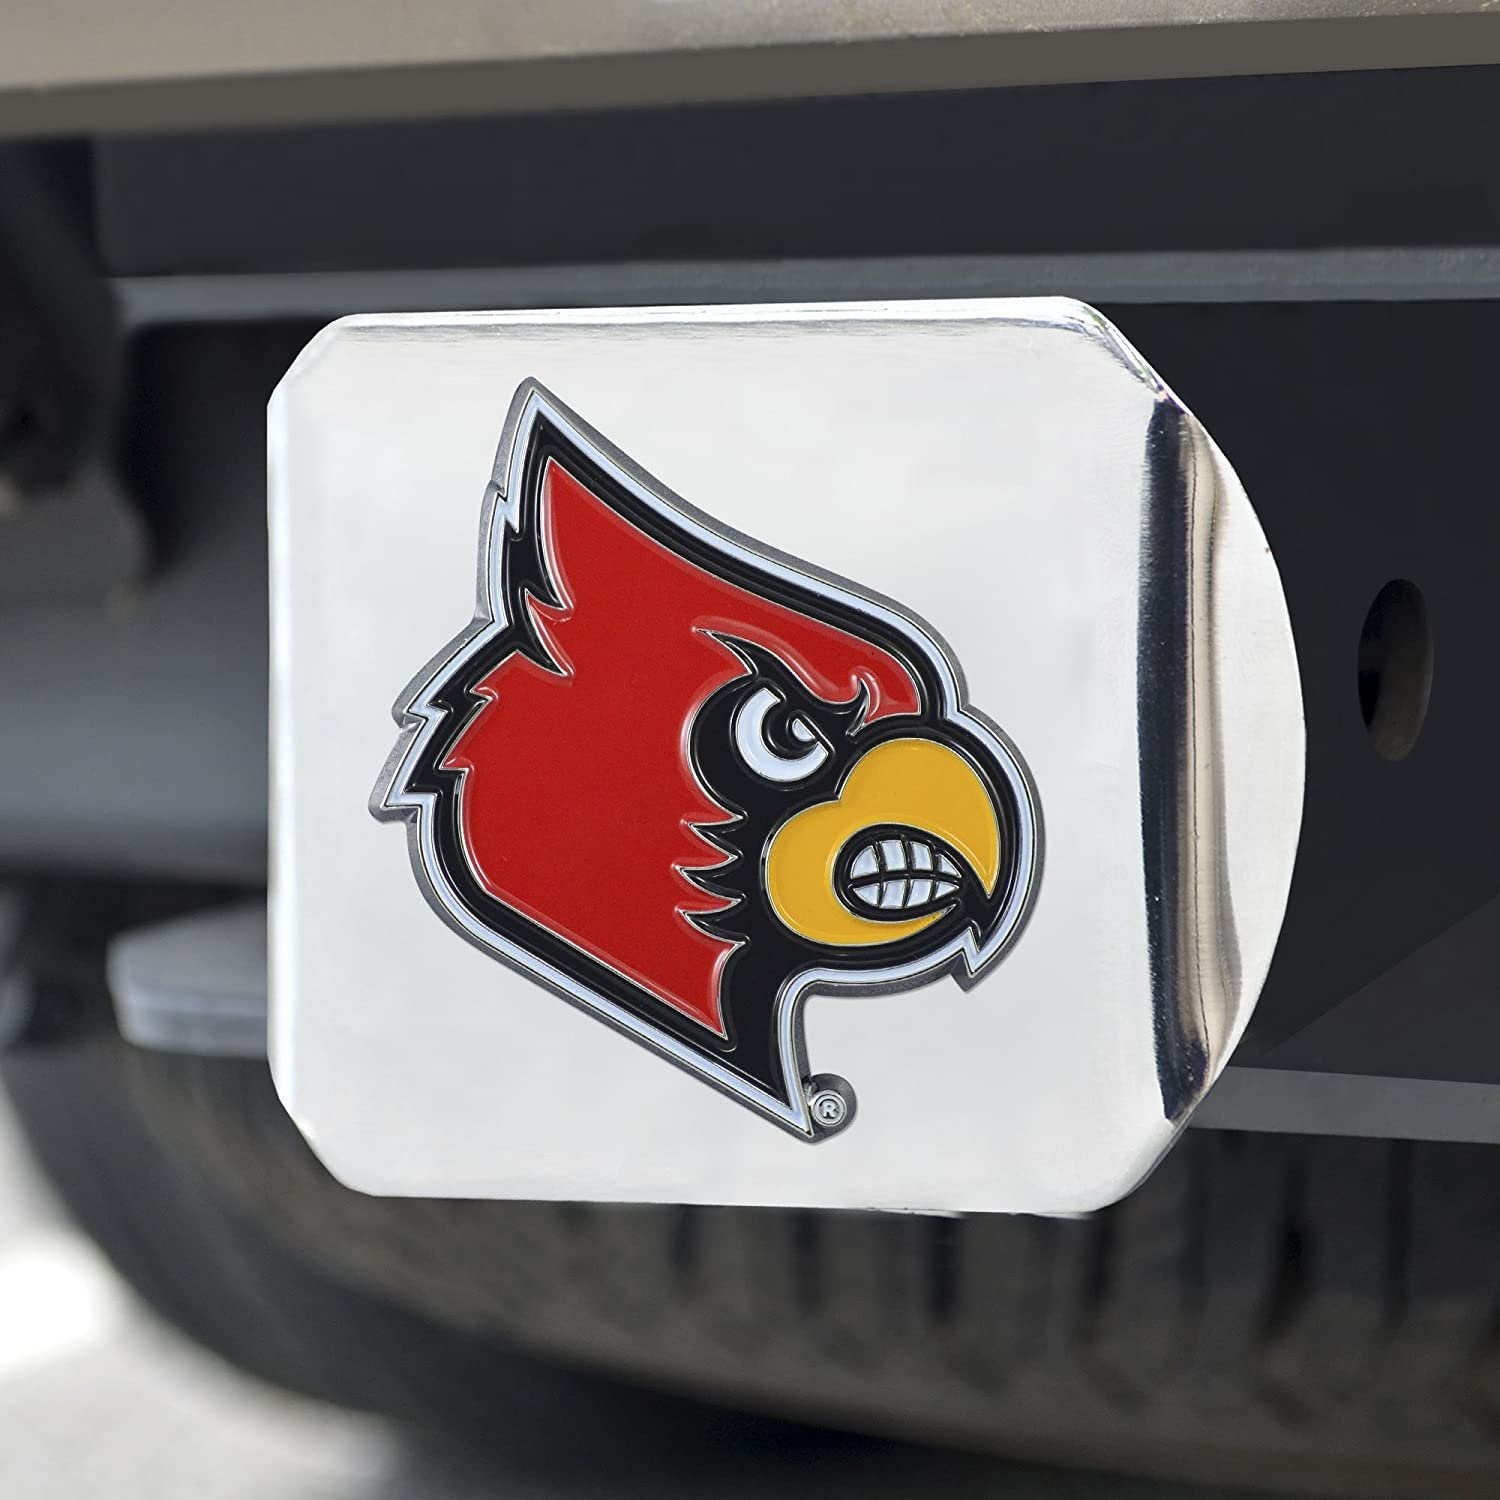 Louisville Cardinals Hitch Cover Solid Metal with Raised Color Metal Emblem 2" Square Type III University of